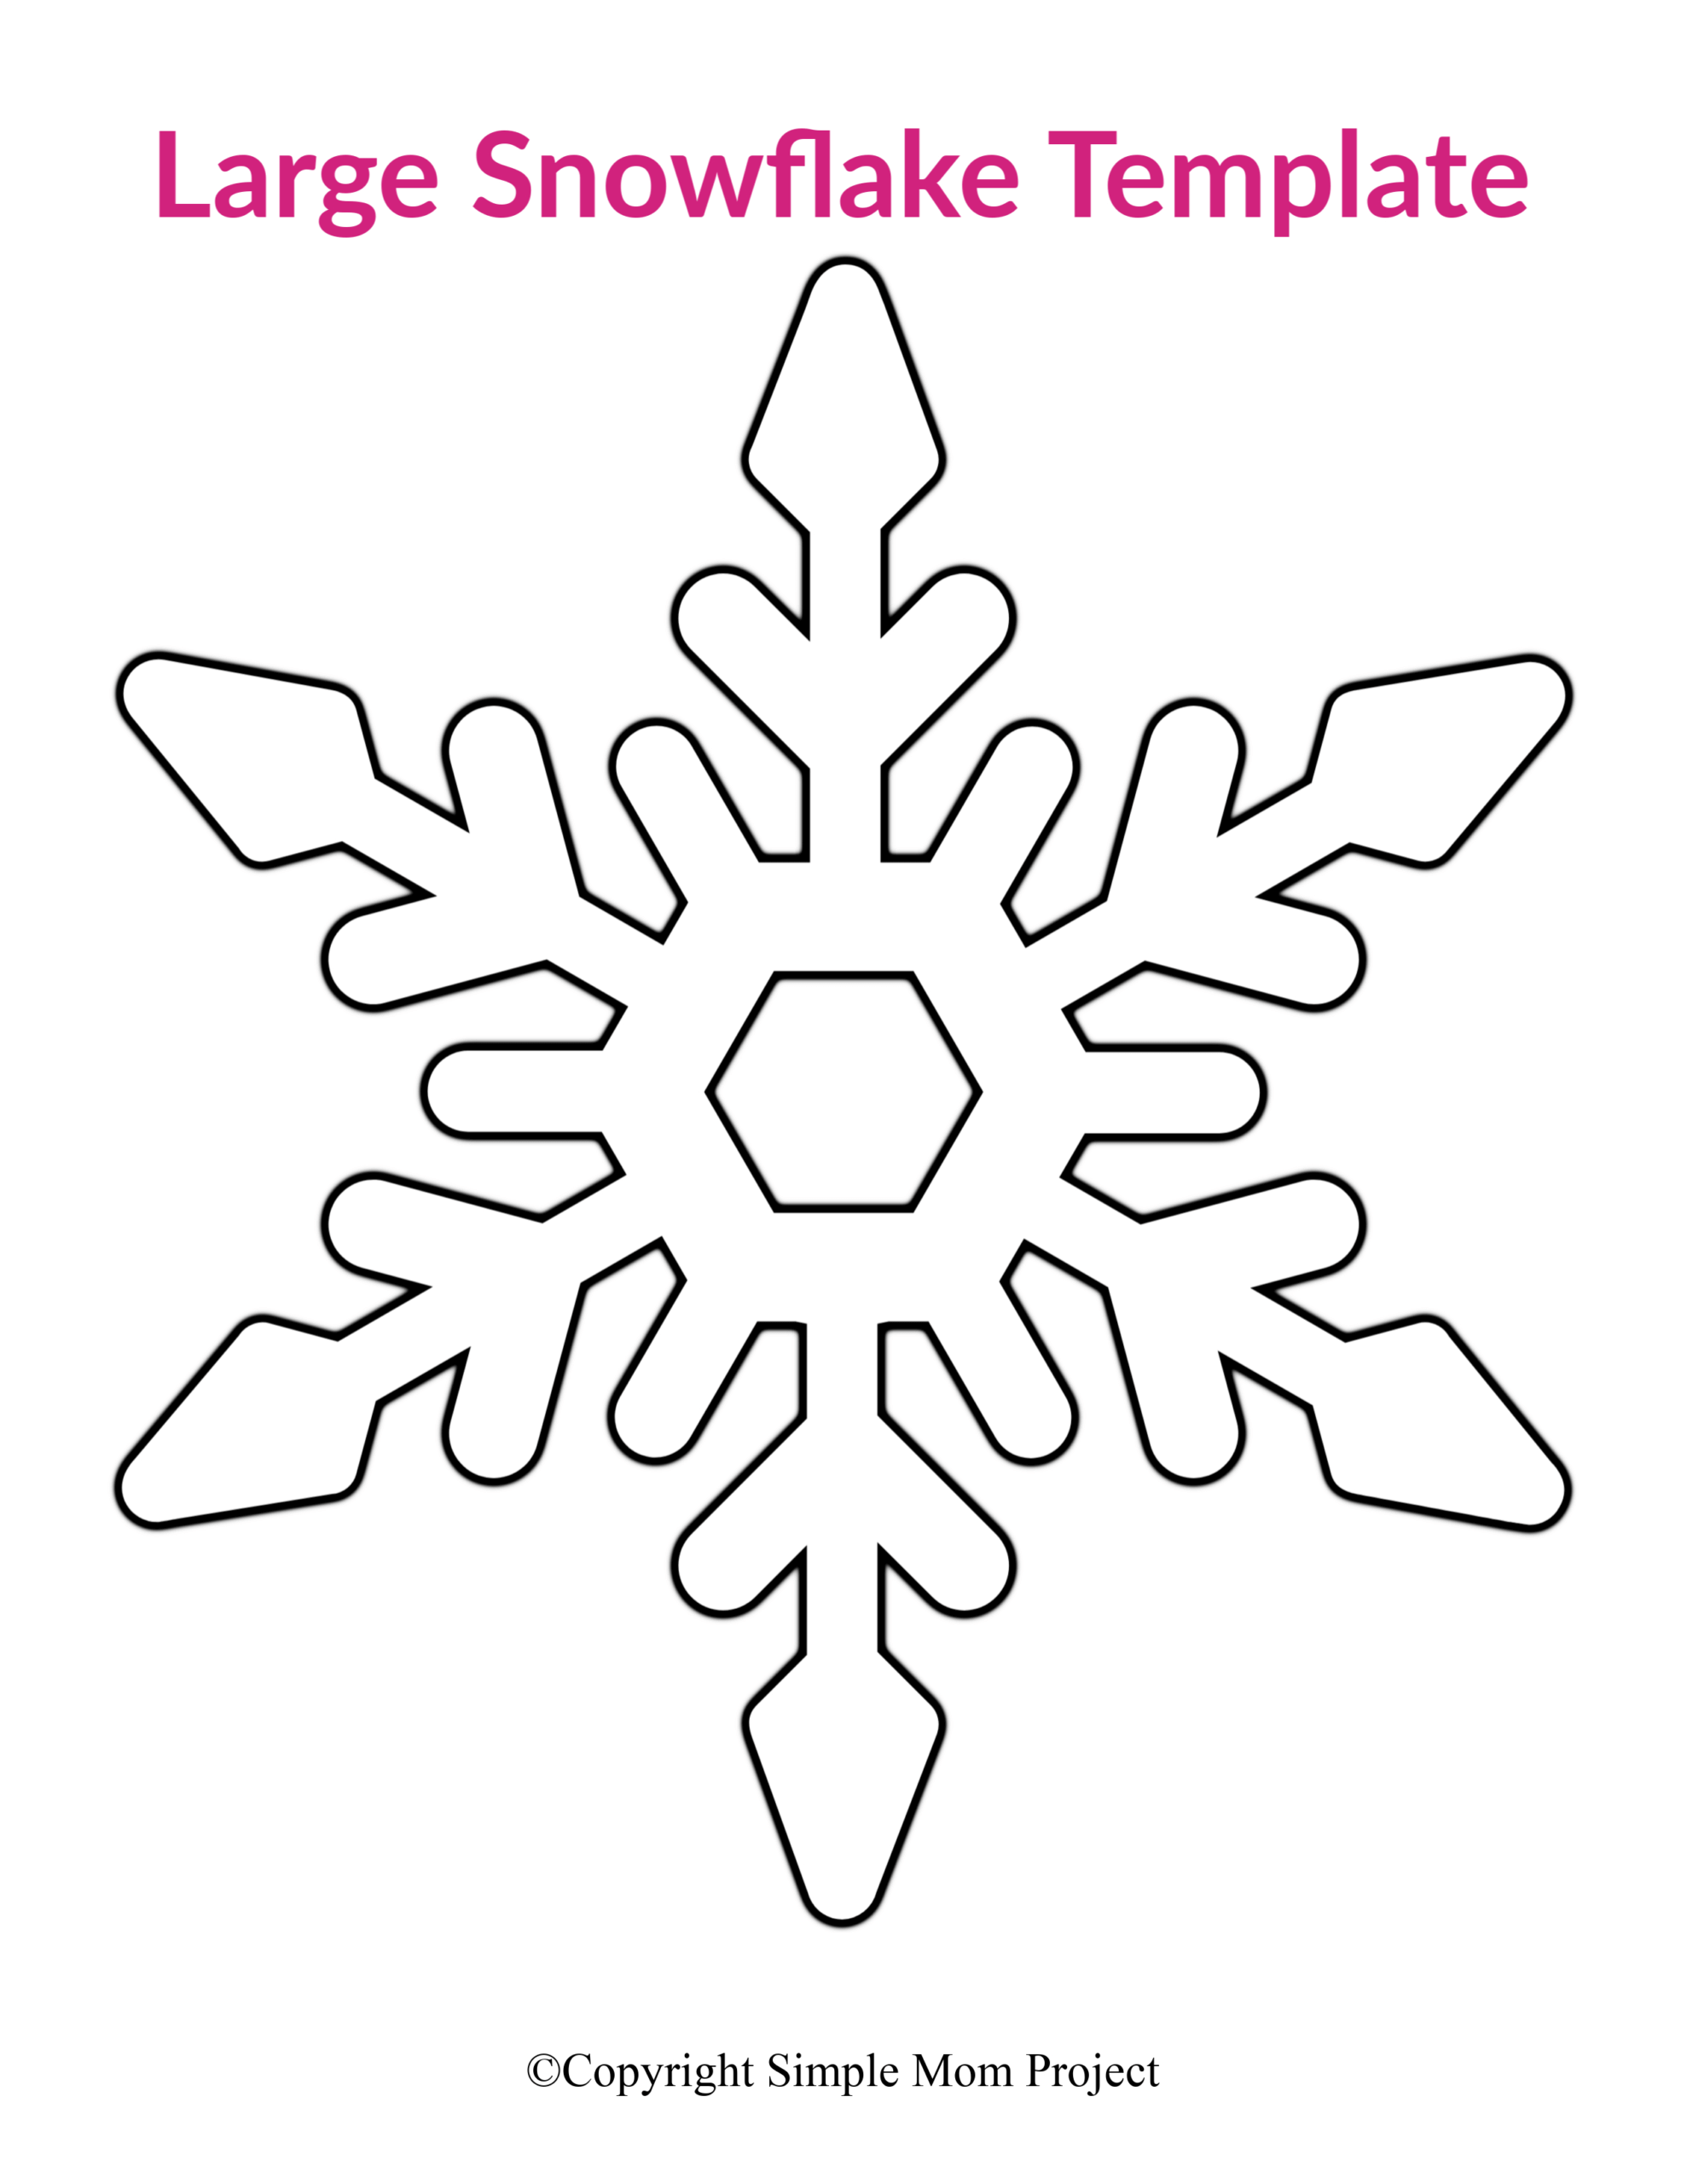 8-free-printable-large-snowflake-templates-simple-mom-project-pertaining-to-blank-snowflake